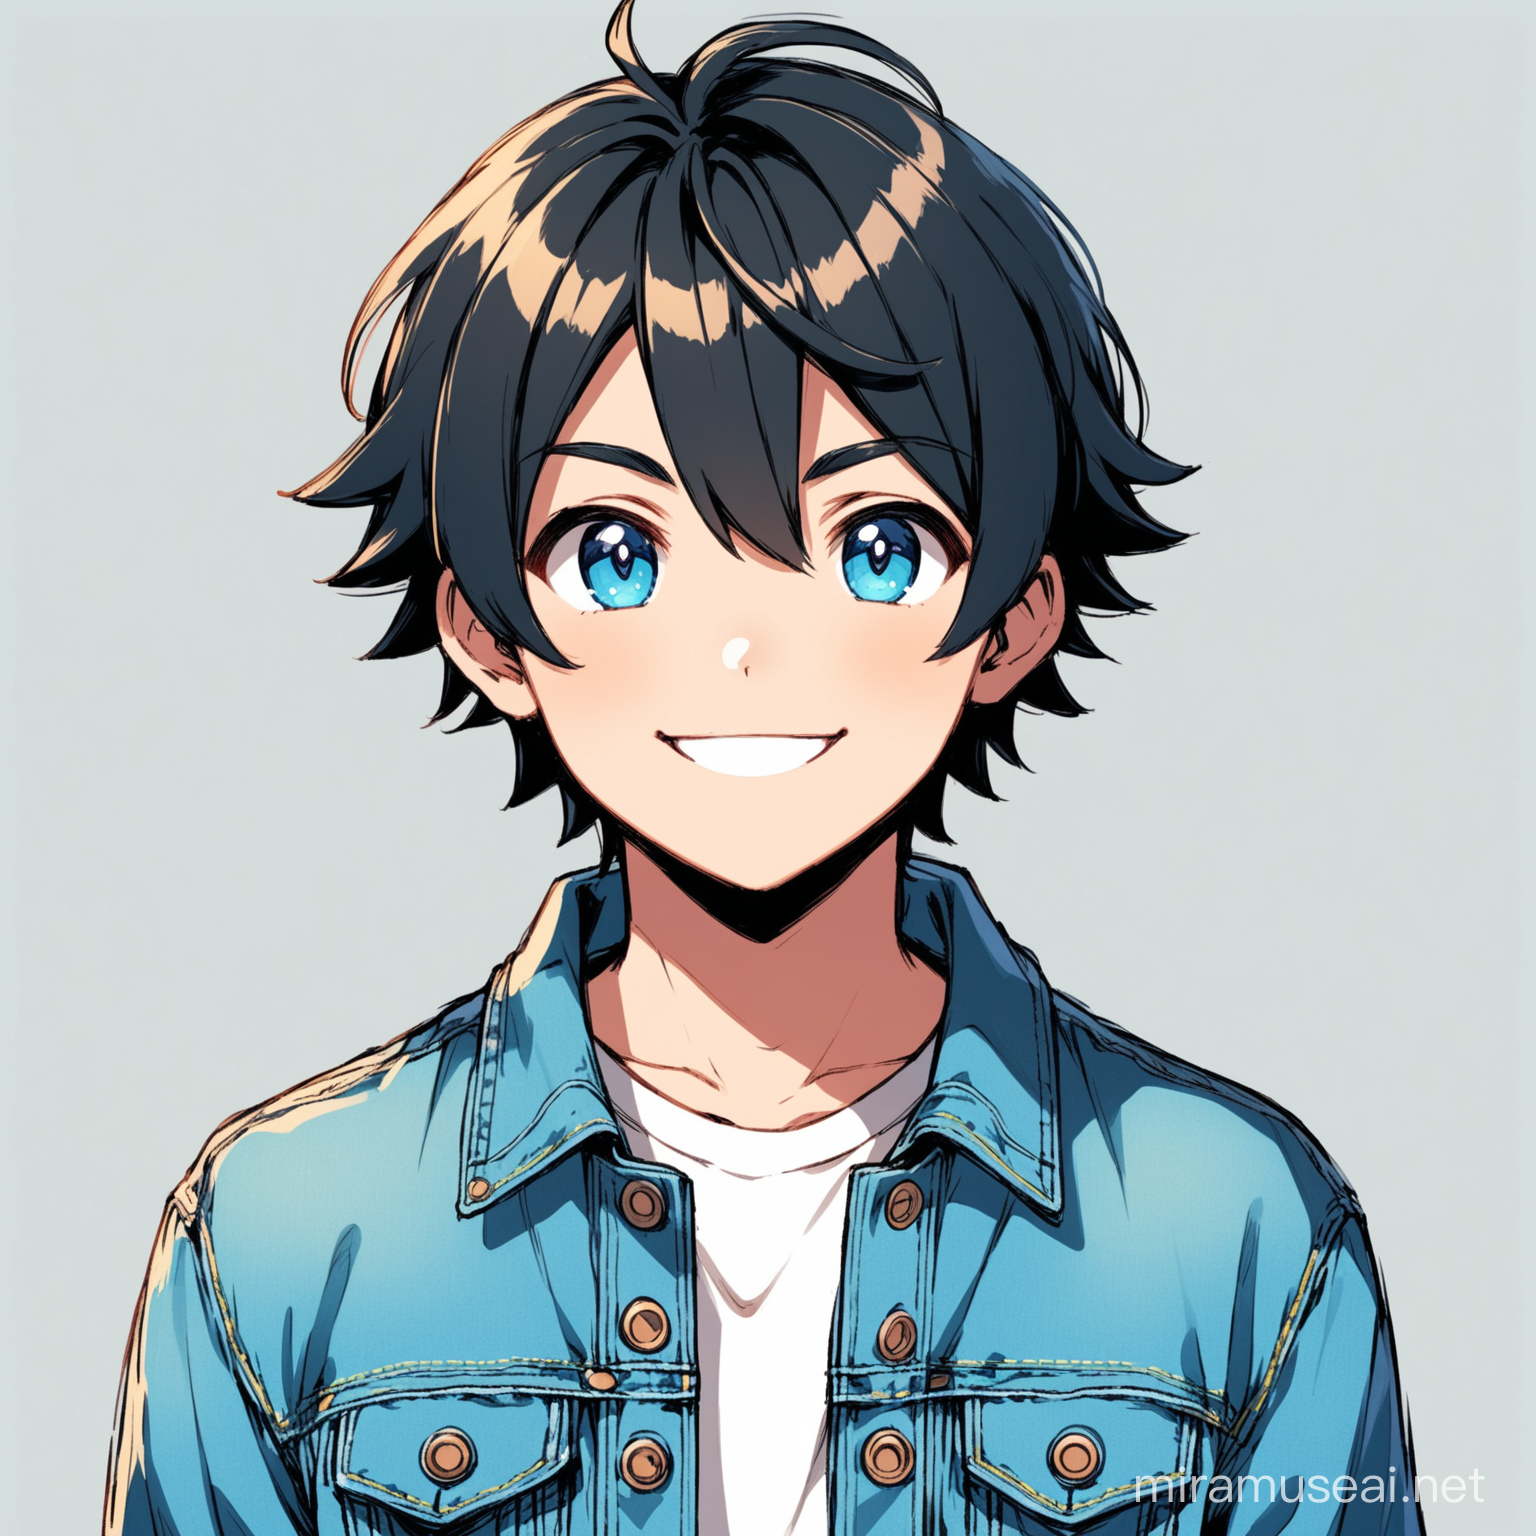 Cheerful Young Man in Denim Jacket with PokemonInspired Style